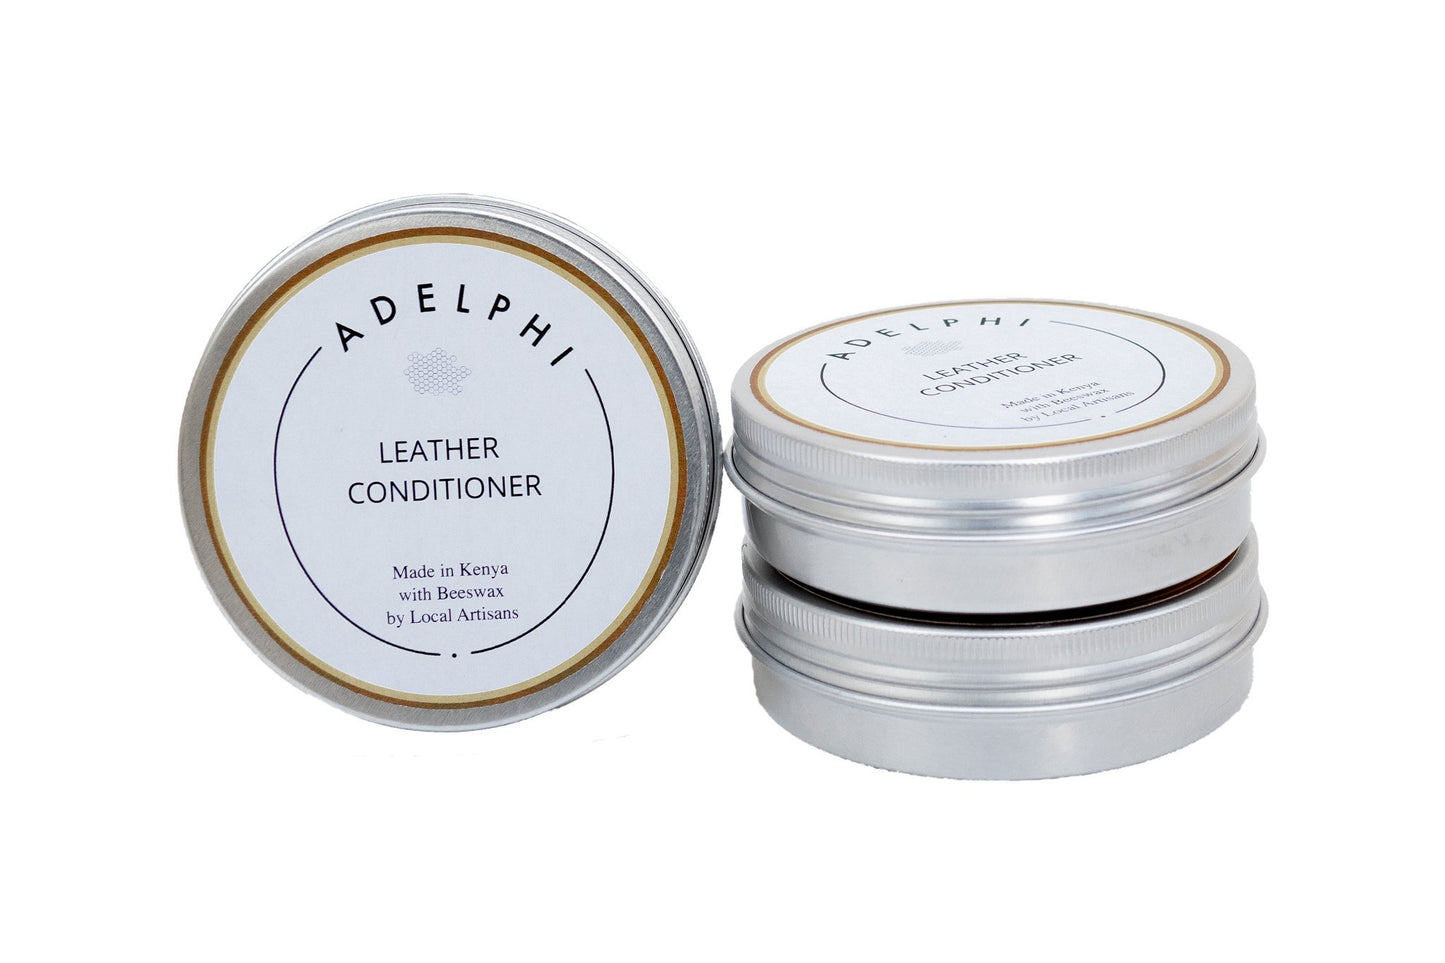 Leather Conditioner by  Adelphi.